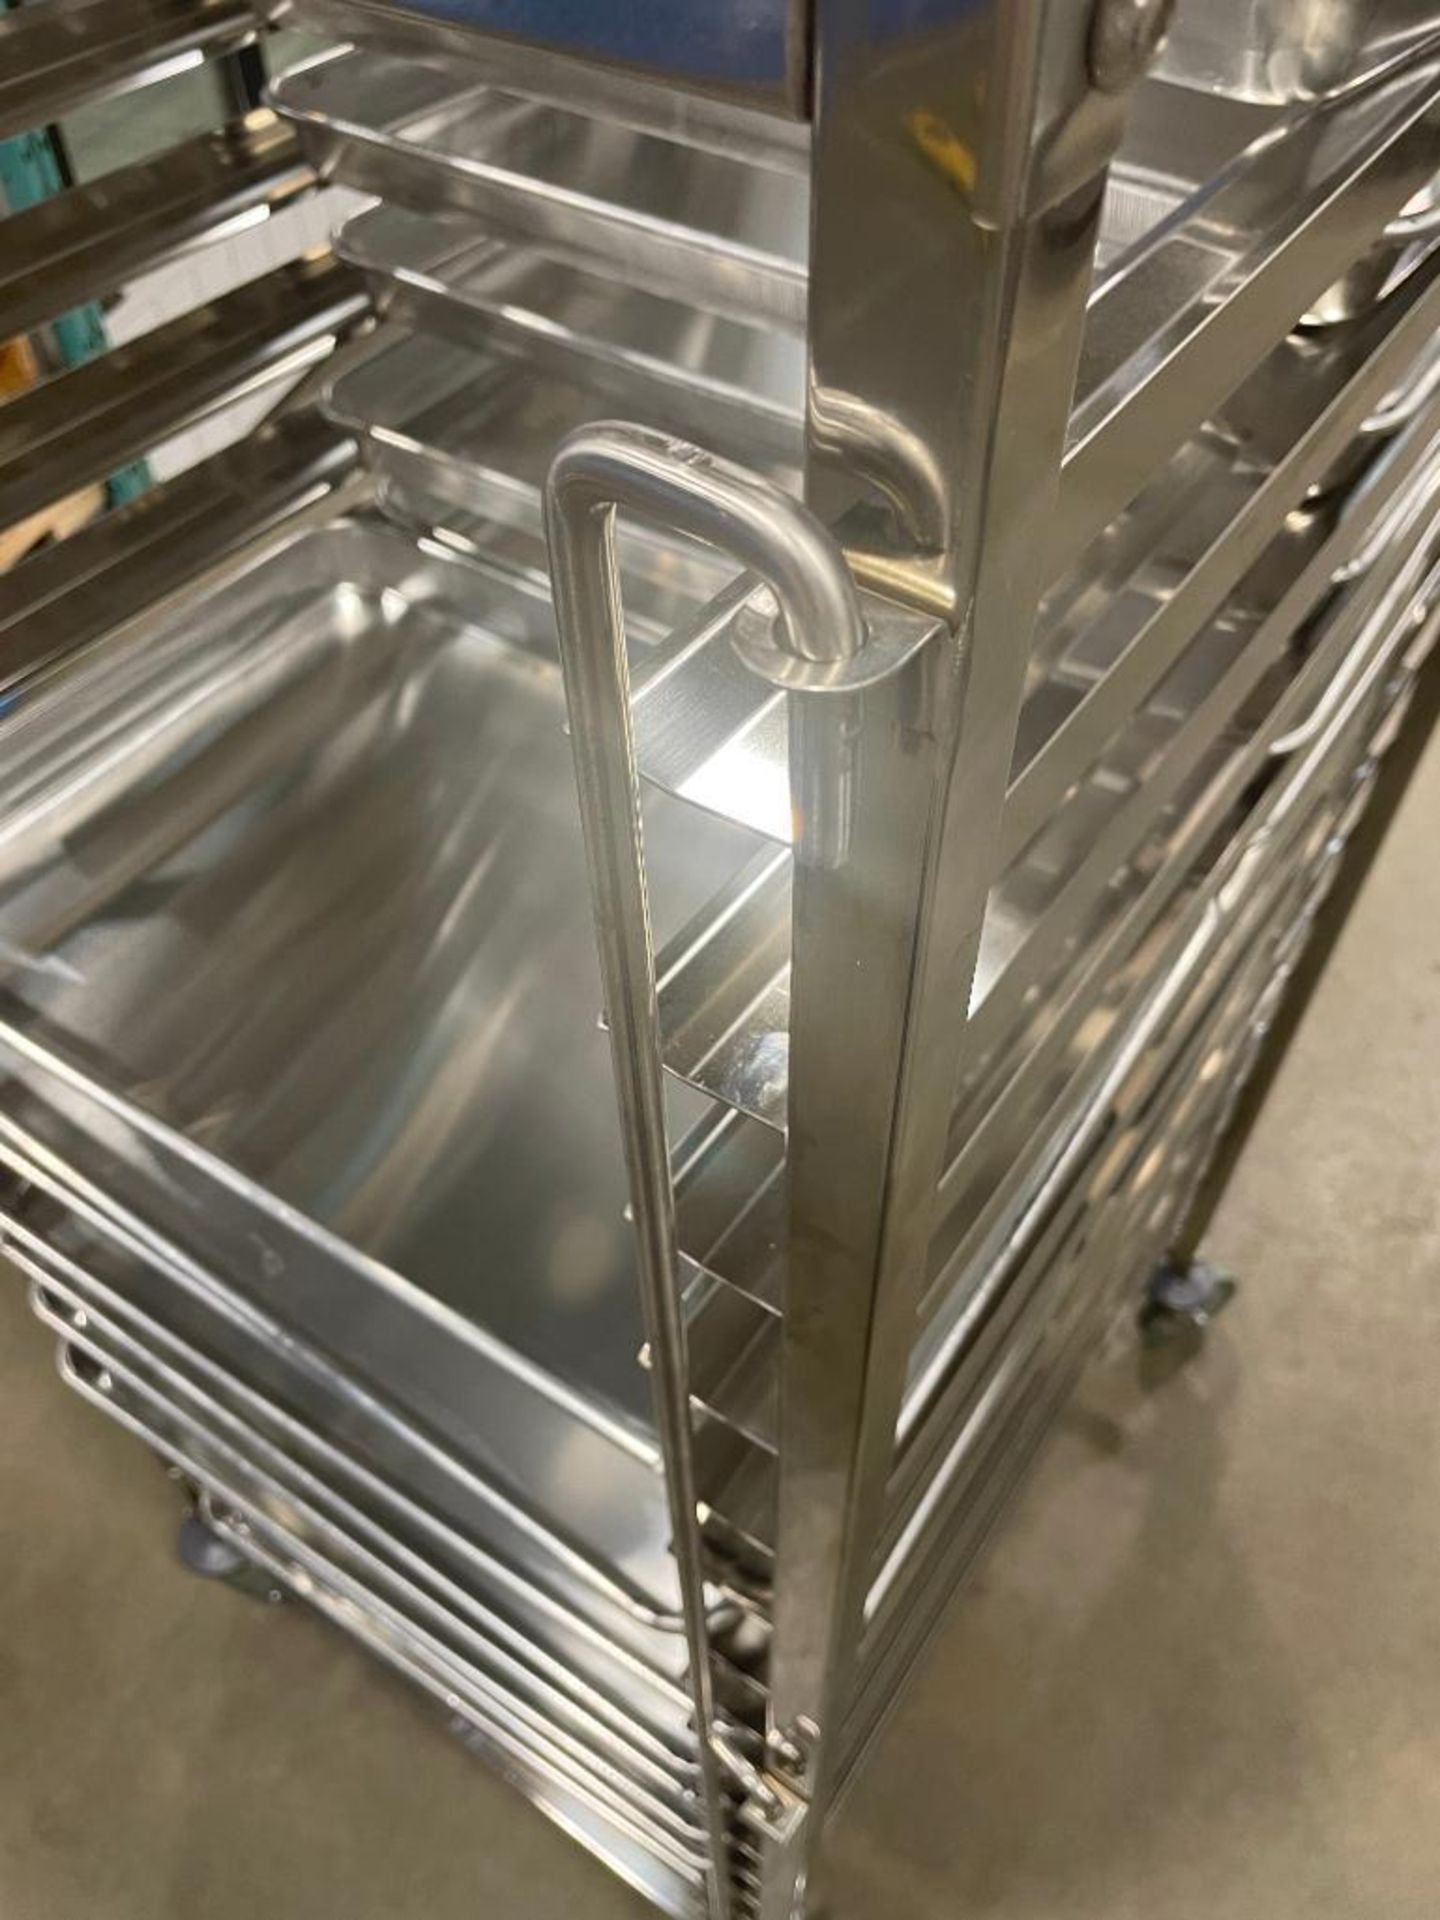 NEW STAINLESS STEEL 16-SLOT OVERSIZED BUN PAN RACK WITH PAN GUARD & (22) PANS - Image 7 of 9